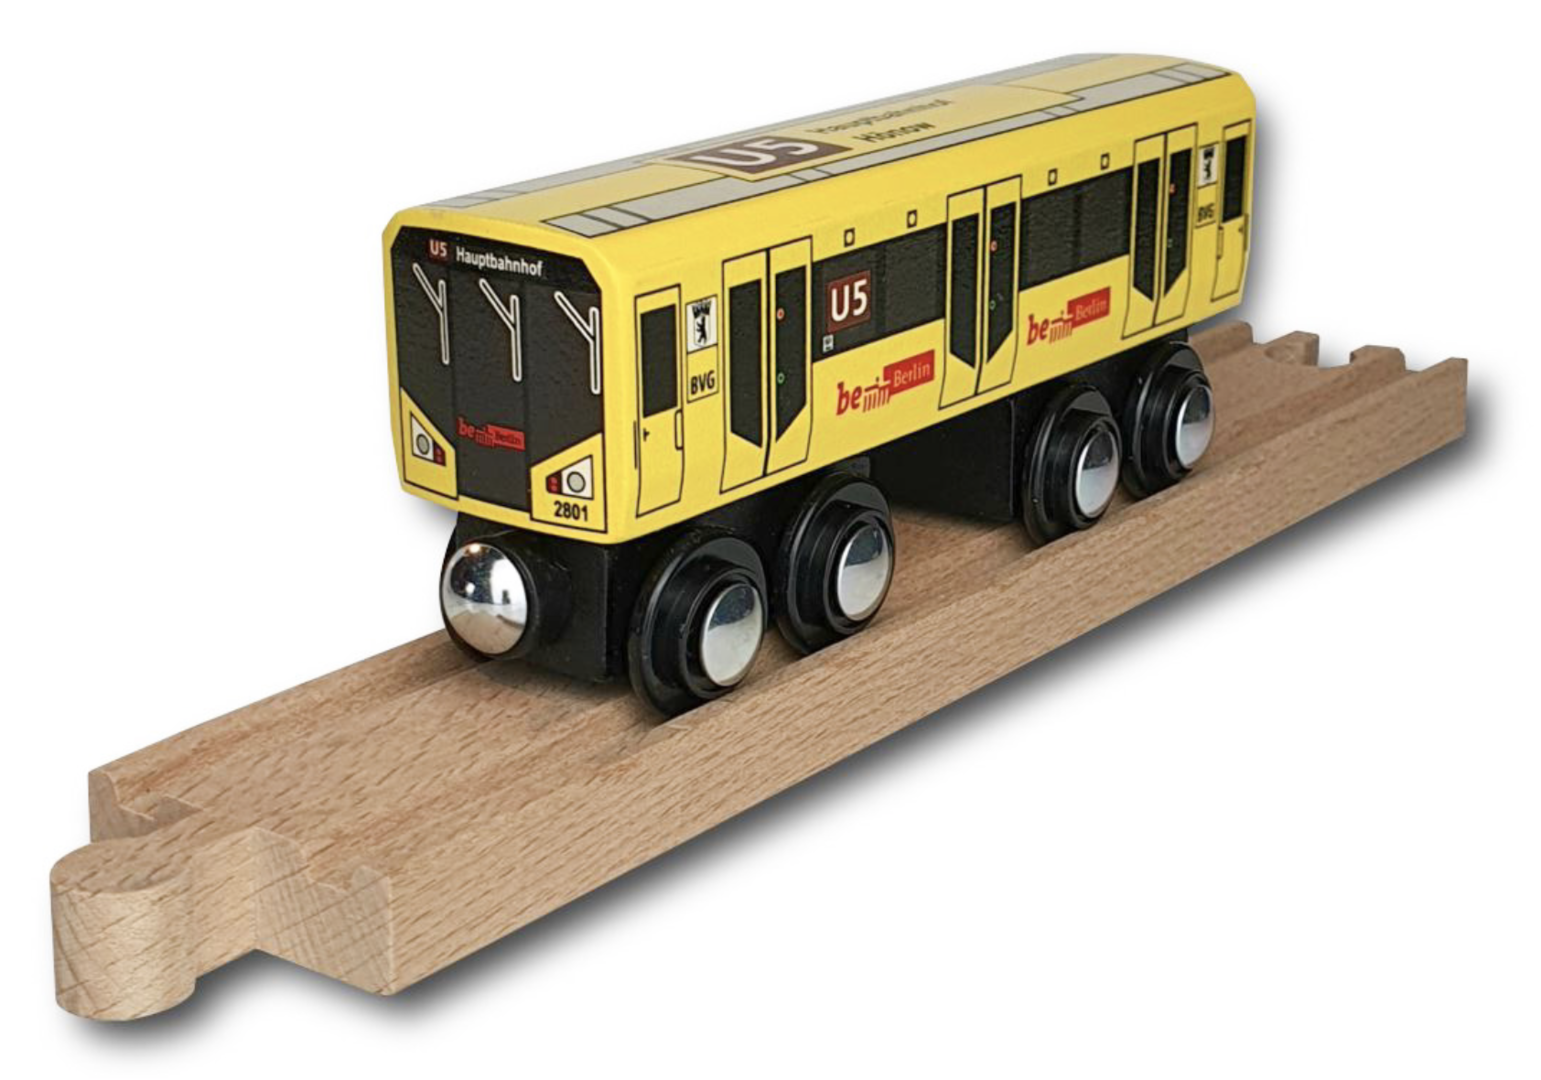 Miniature wooden subway Berlin U5 to play with.